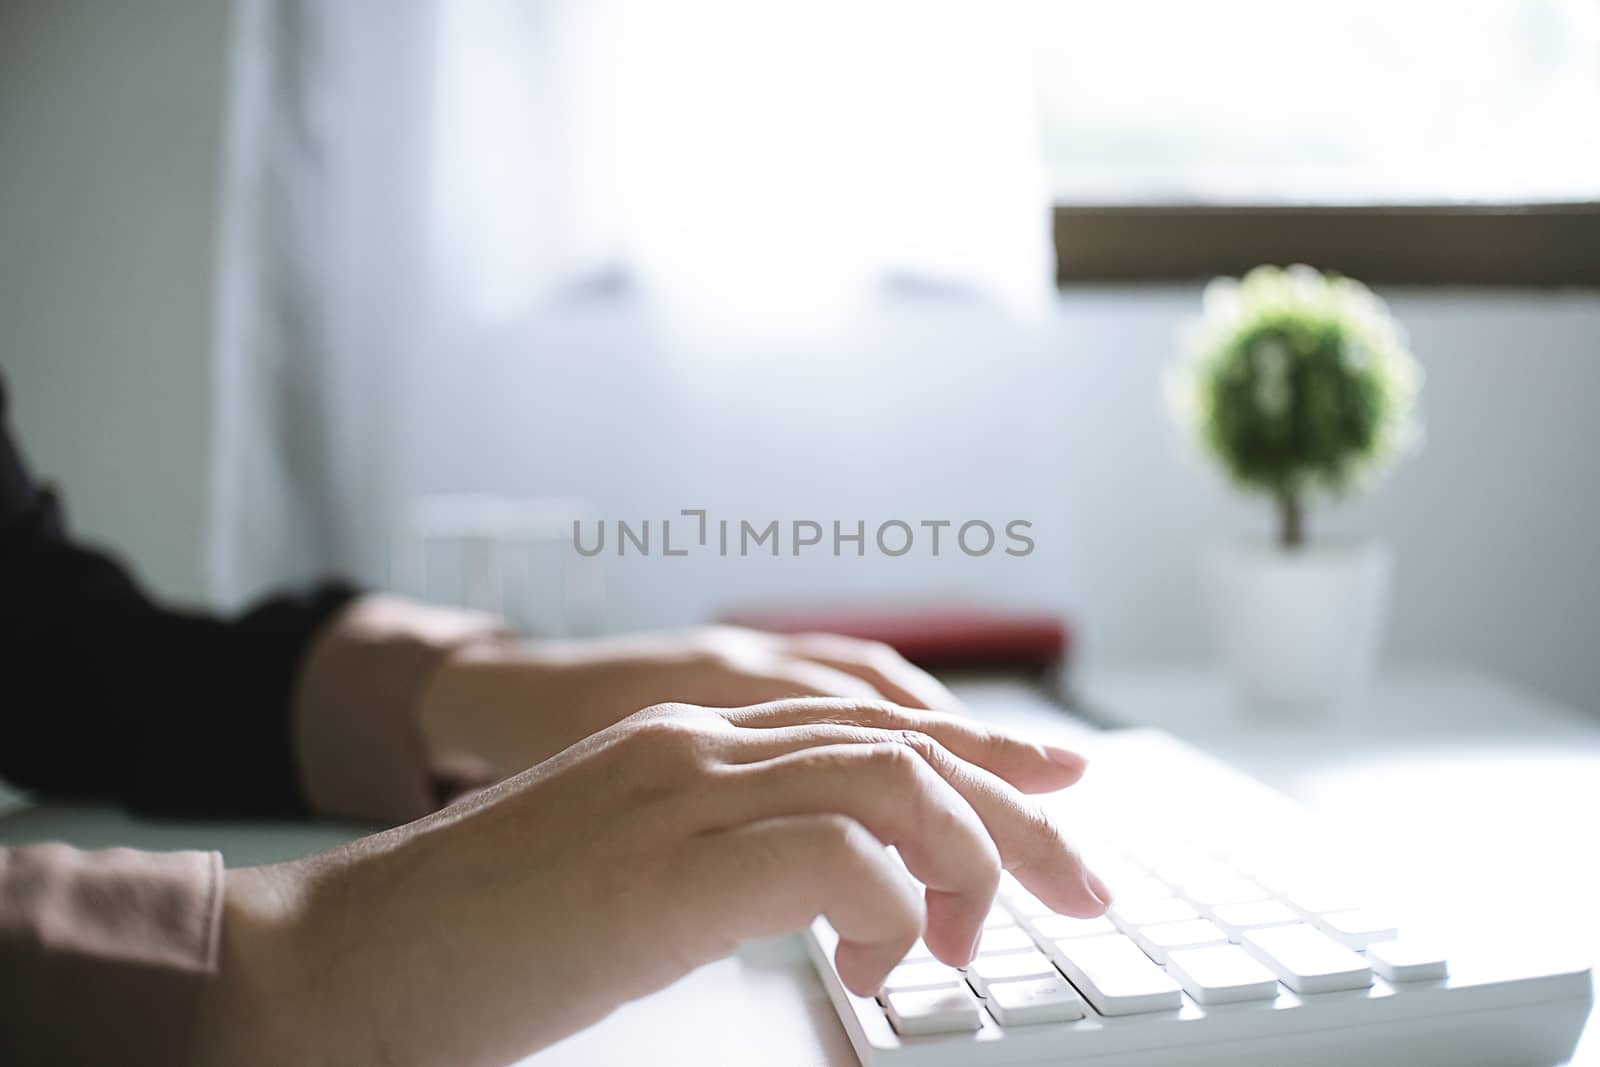 Woman working by using a laptop computer on wooden table. Hands typing on a keyboard.